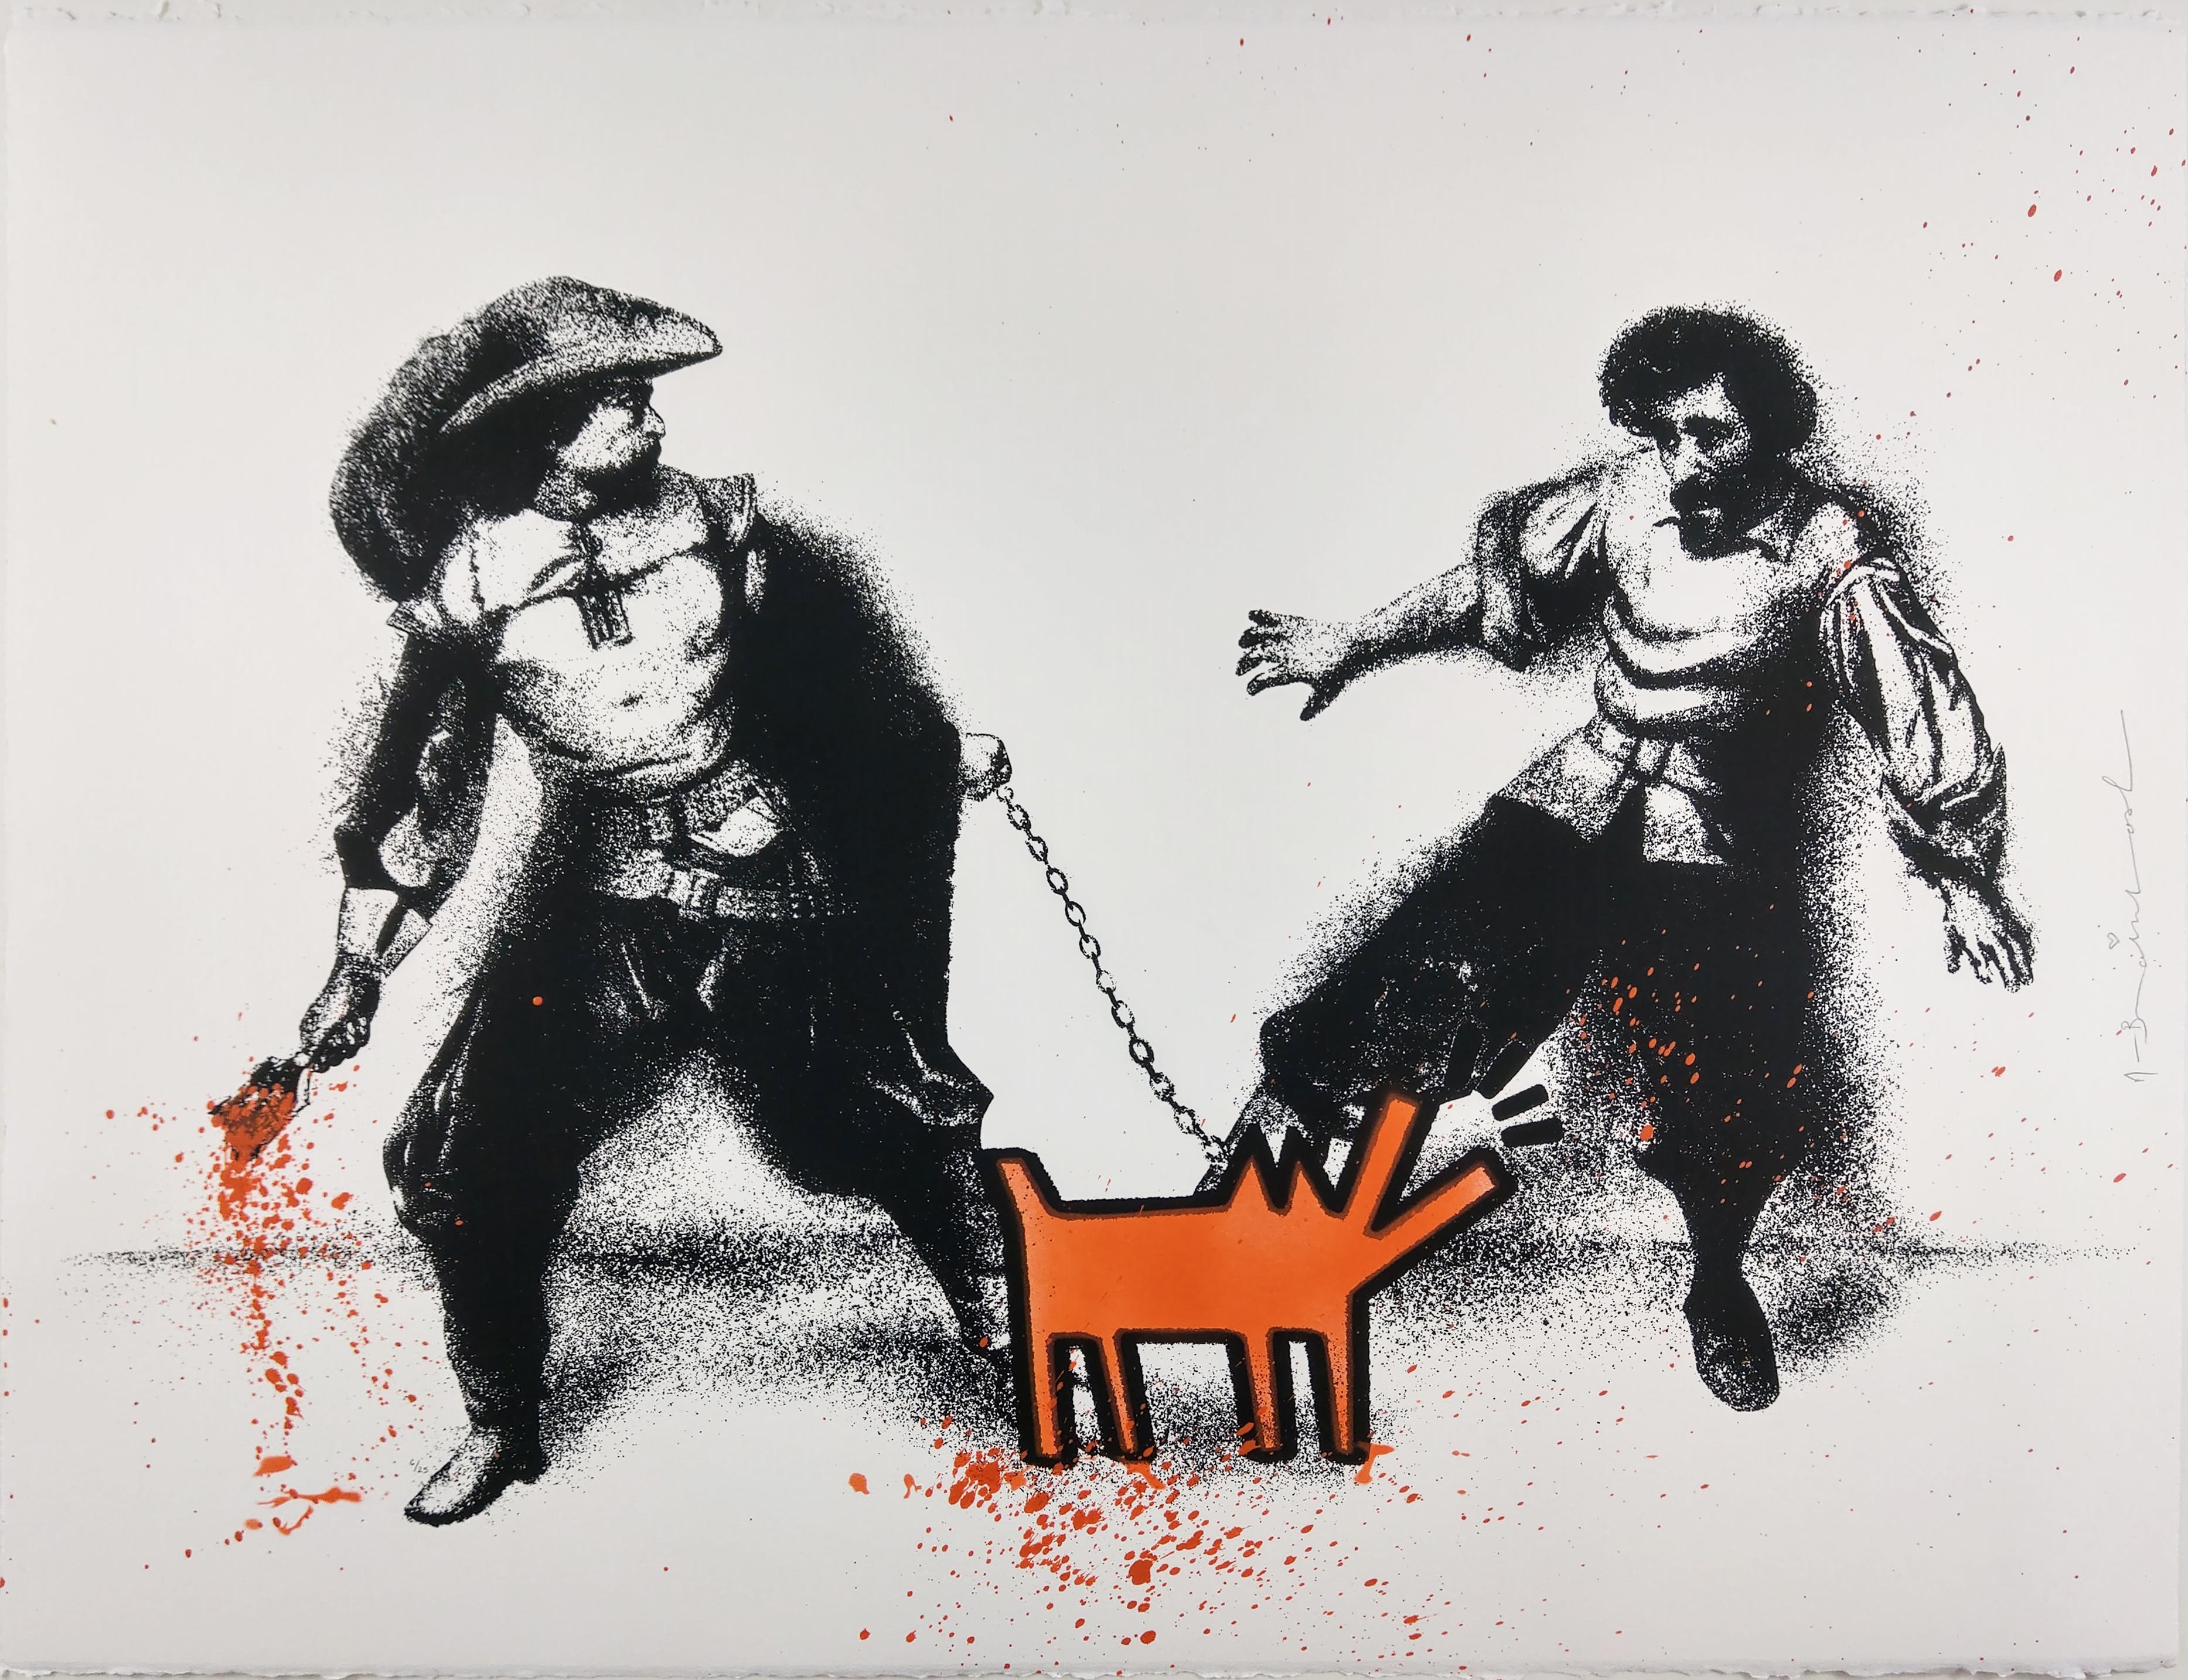 Watch Out! Orange by Mr. Brainwash - Street Art Print, Unique & Hand Finished. Mr. Brainwash's spin on the famous dog that was previously used by Banksy (Choose Your Weapon) and Keith Haring (Barking Dogs.) This is a one-color screen print that is